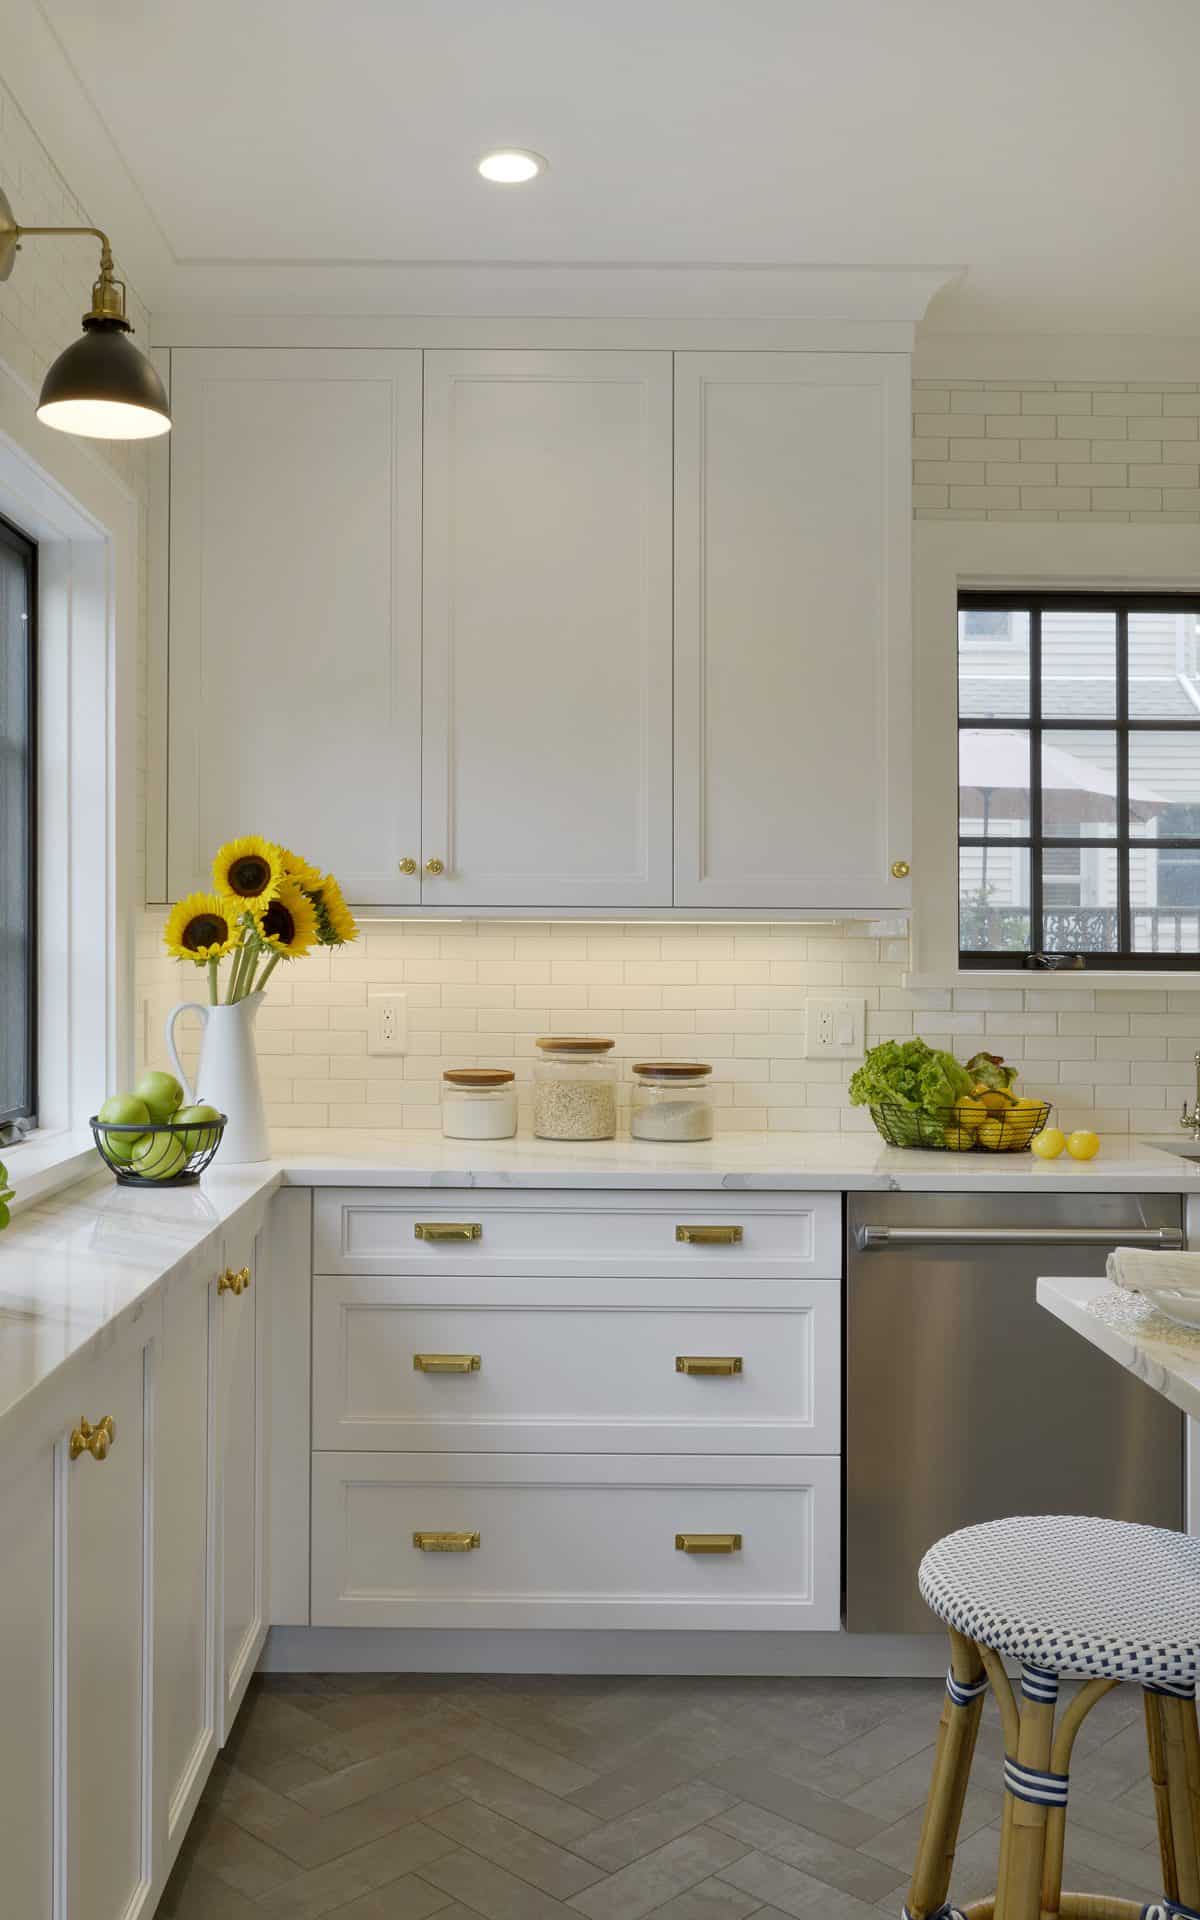 Classic kitchen features white cabinets, gold hardware and herringbone pattern floor.